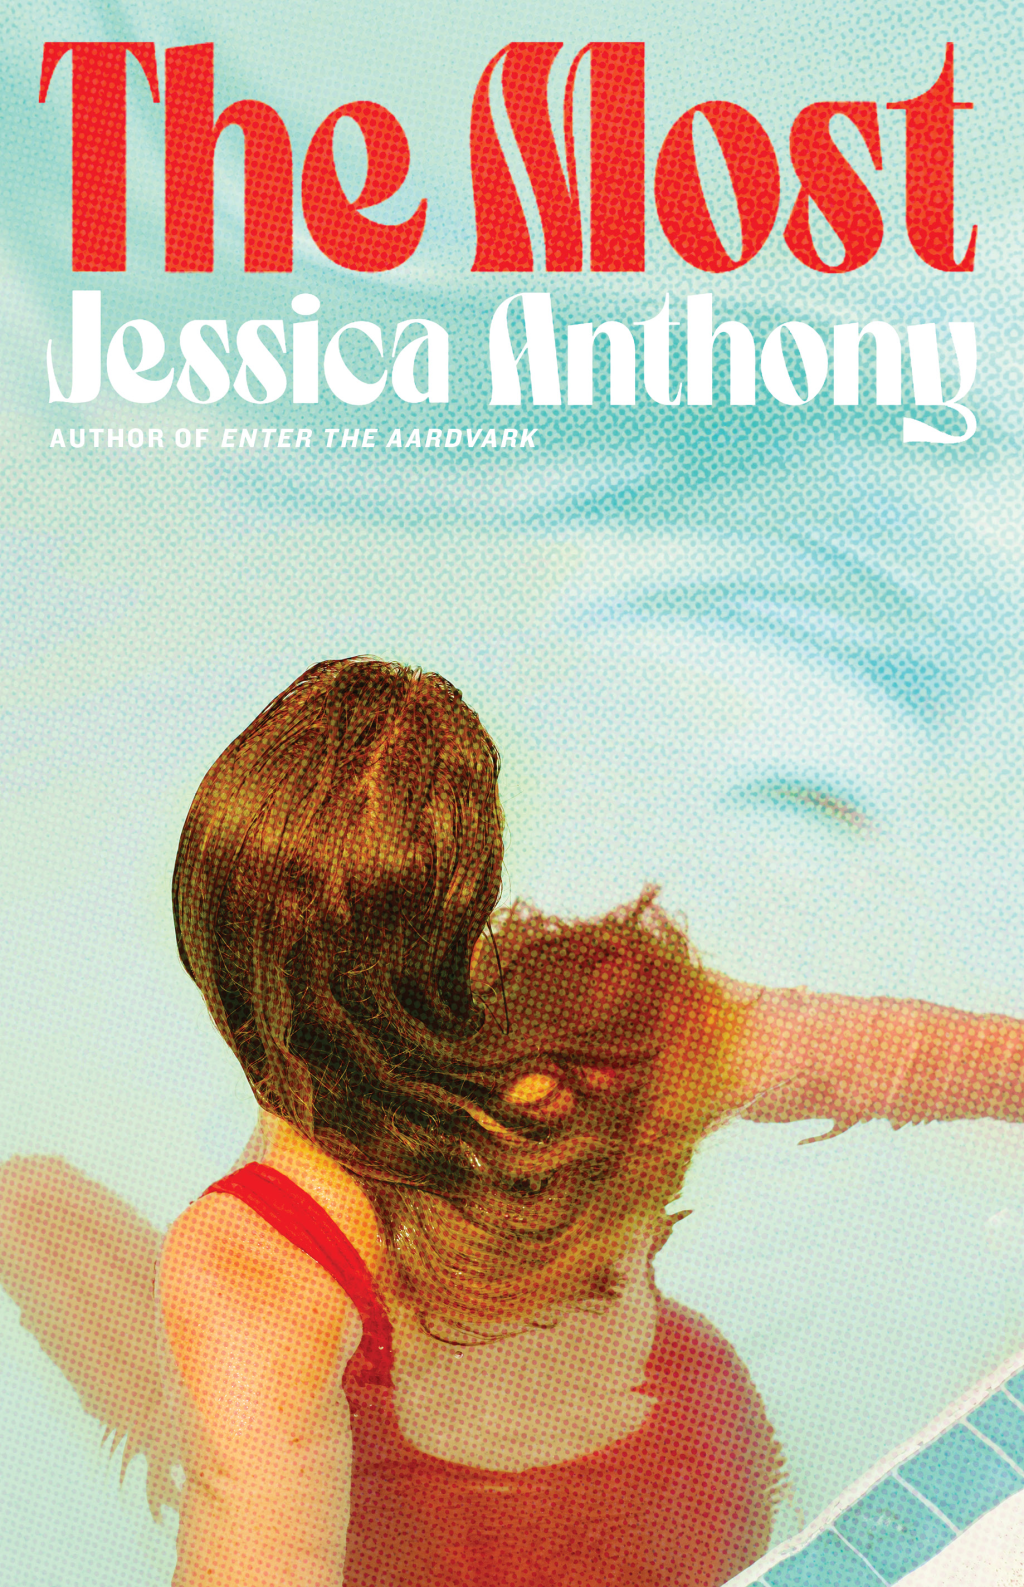 The Most by Jessica Anthony